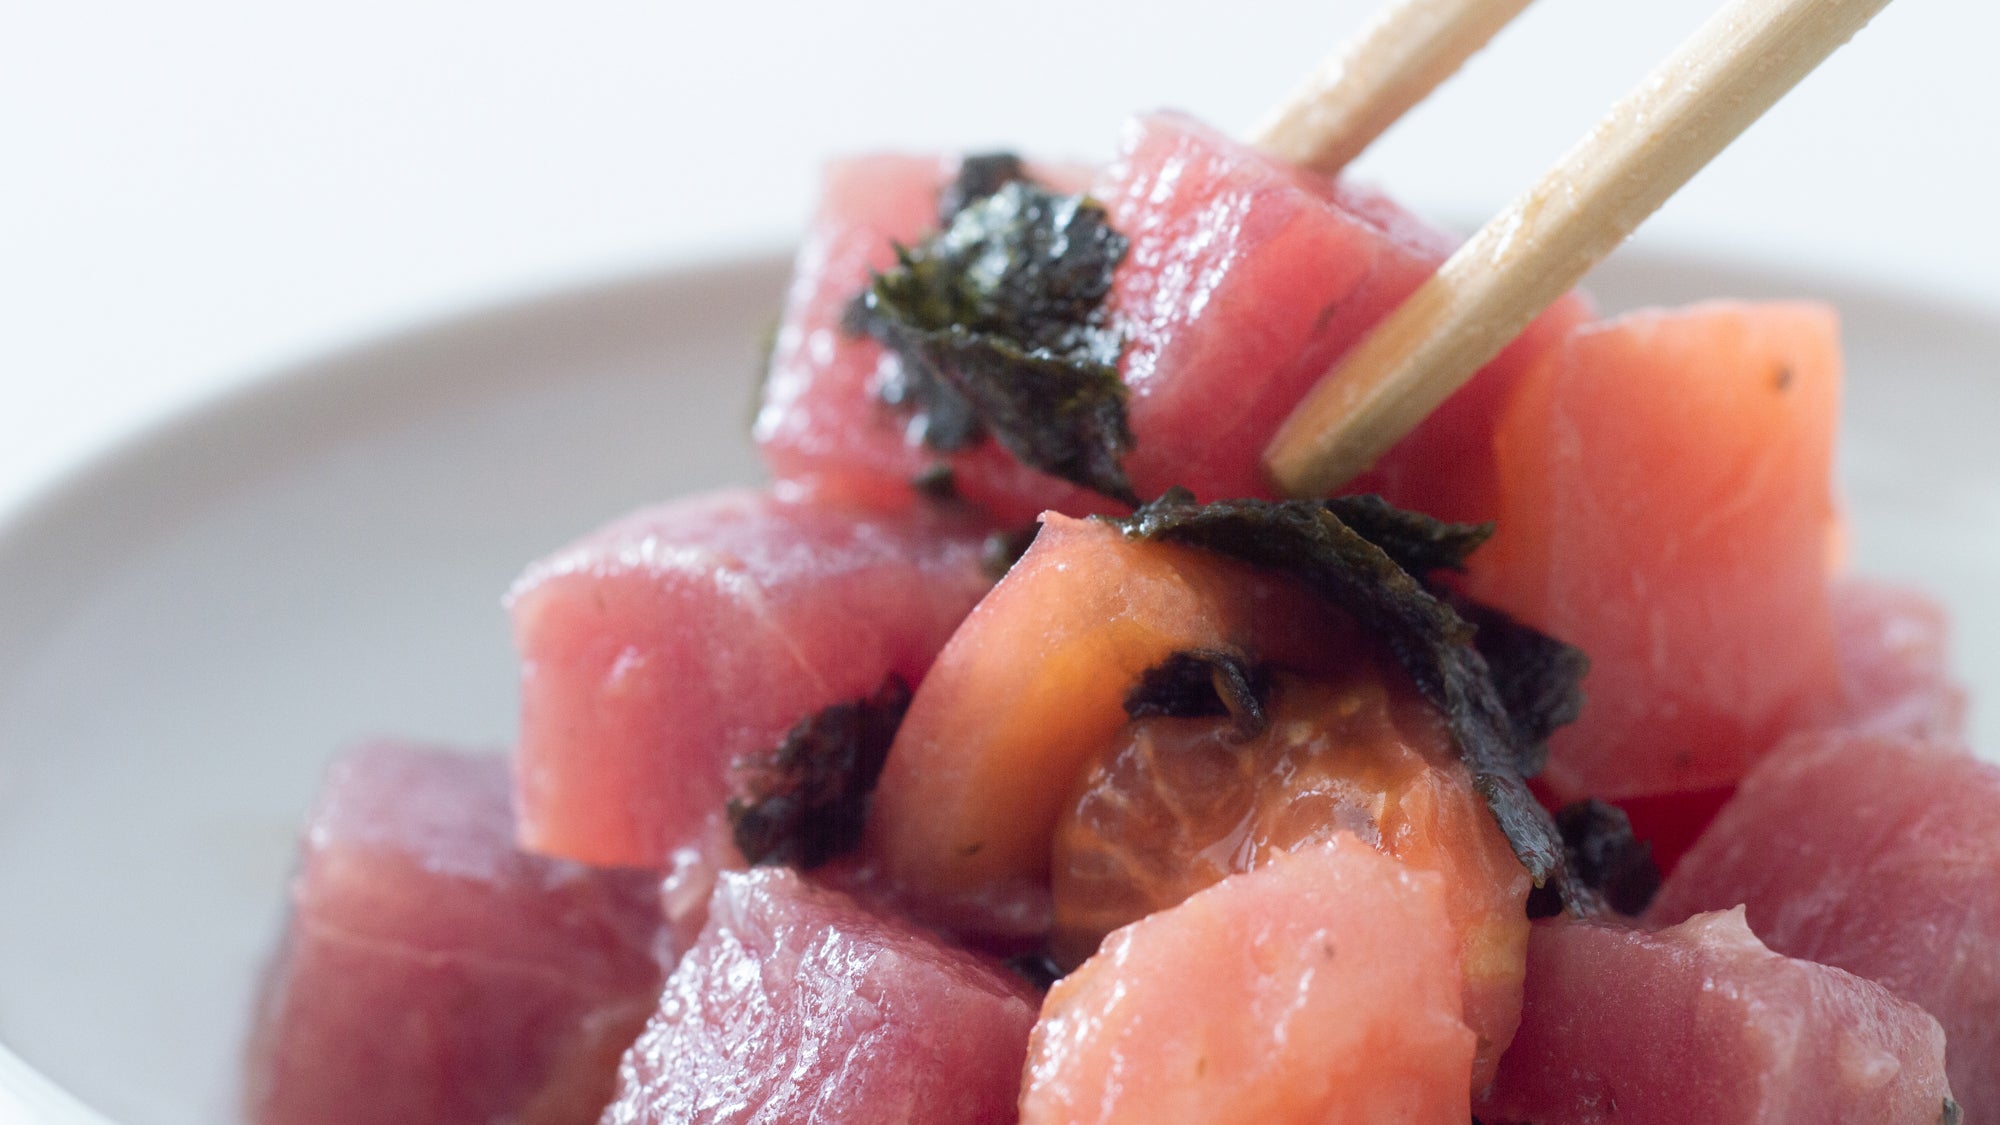 Japanese Comfort Food in 2 Steps: Tuna and Tomato with Sesame Oil